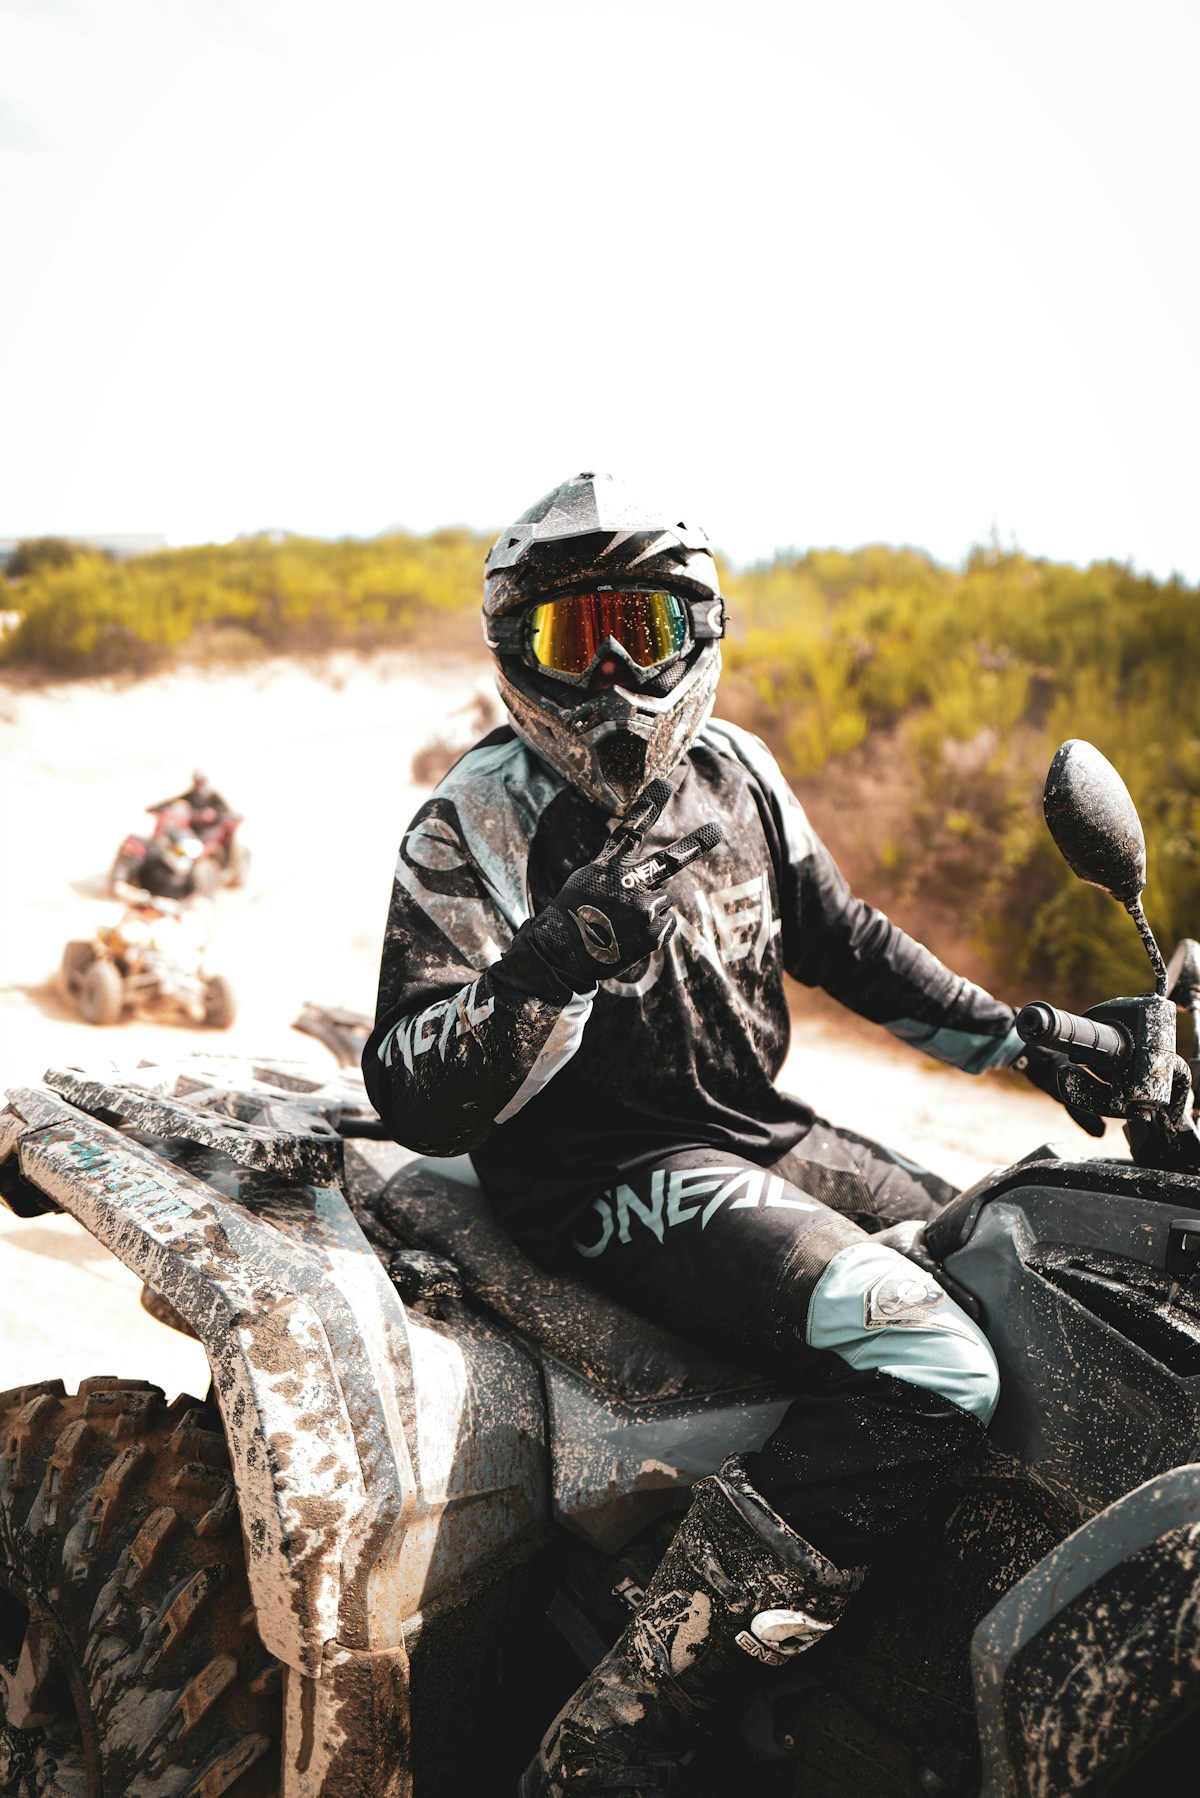 ATV rider throws up a peace sign mid ride